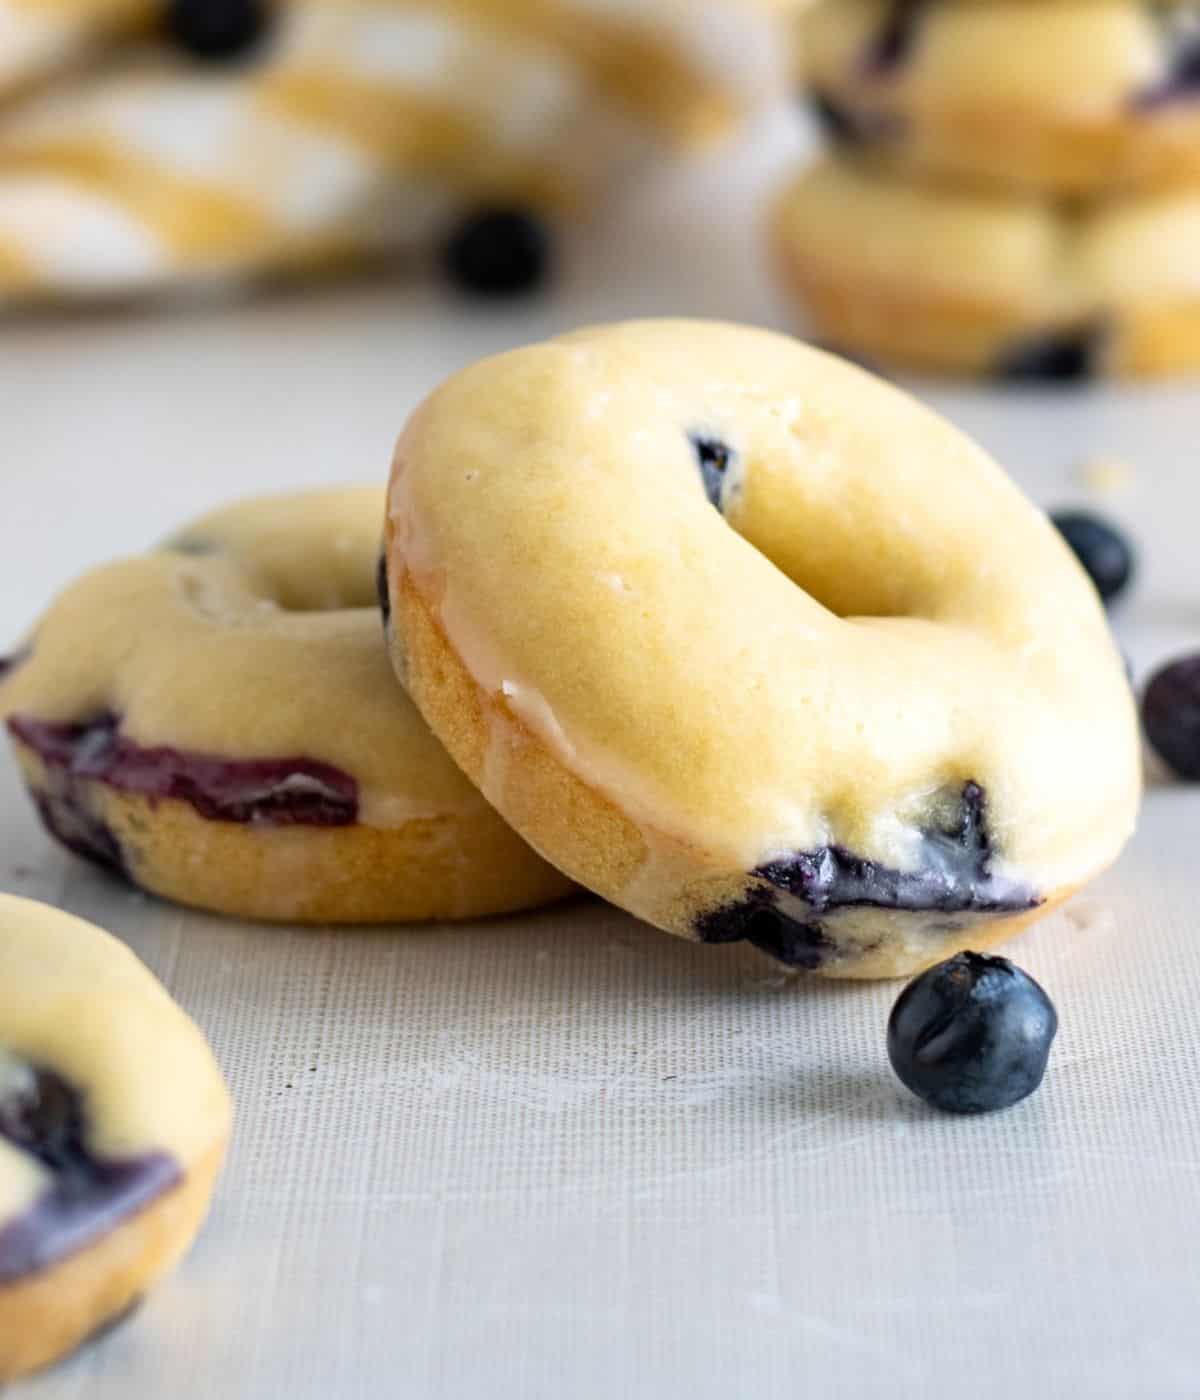 Up close shot of two blueberry donuts with loose blueberries and more donuts up front and in the background.